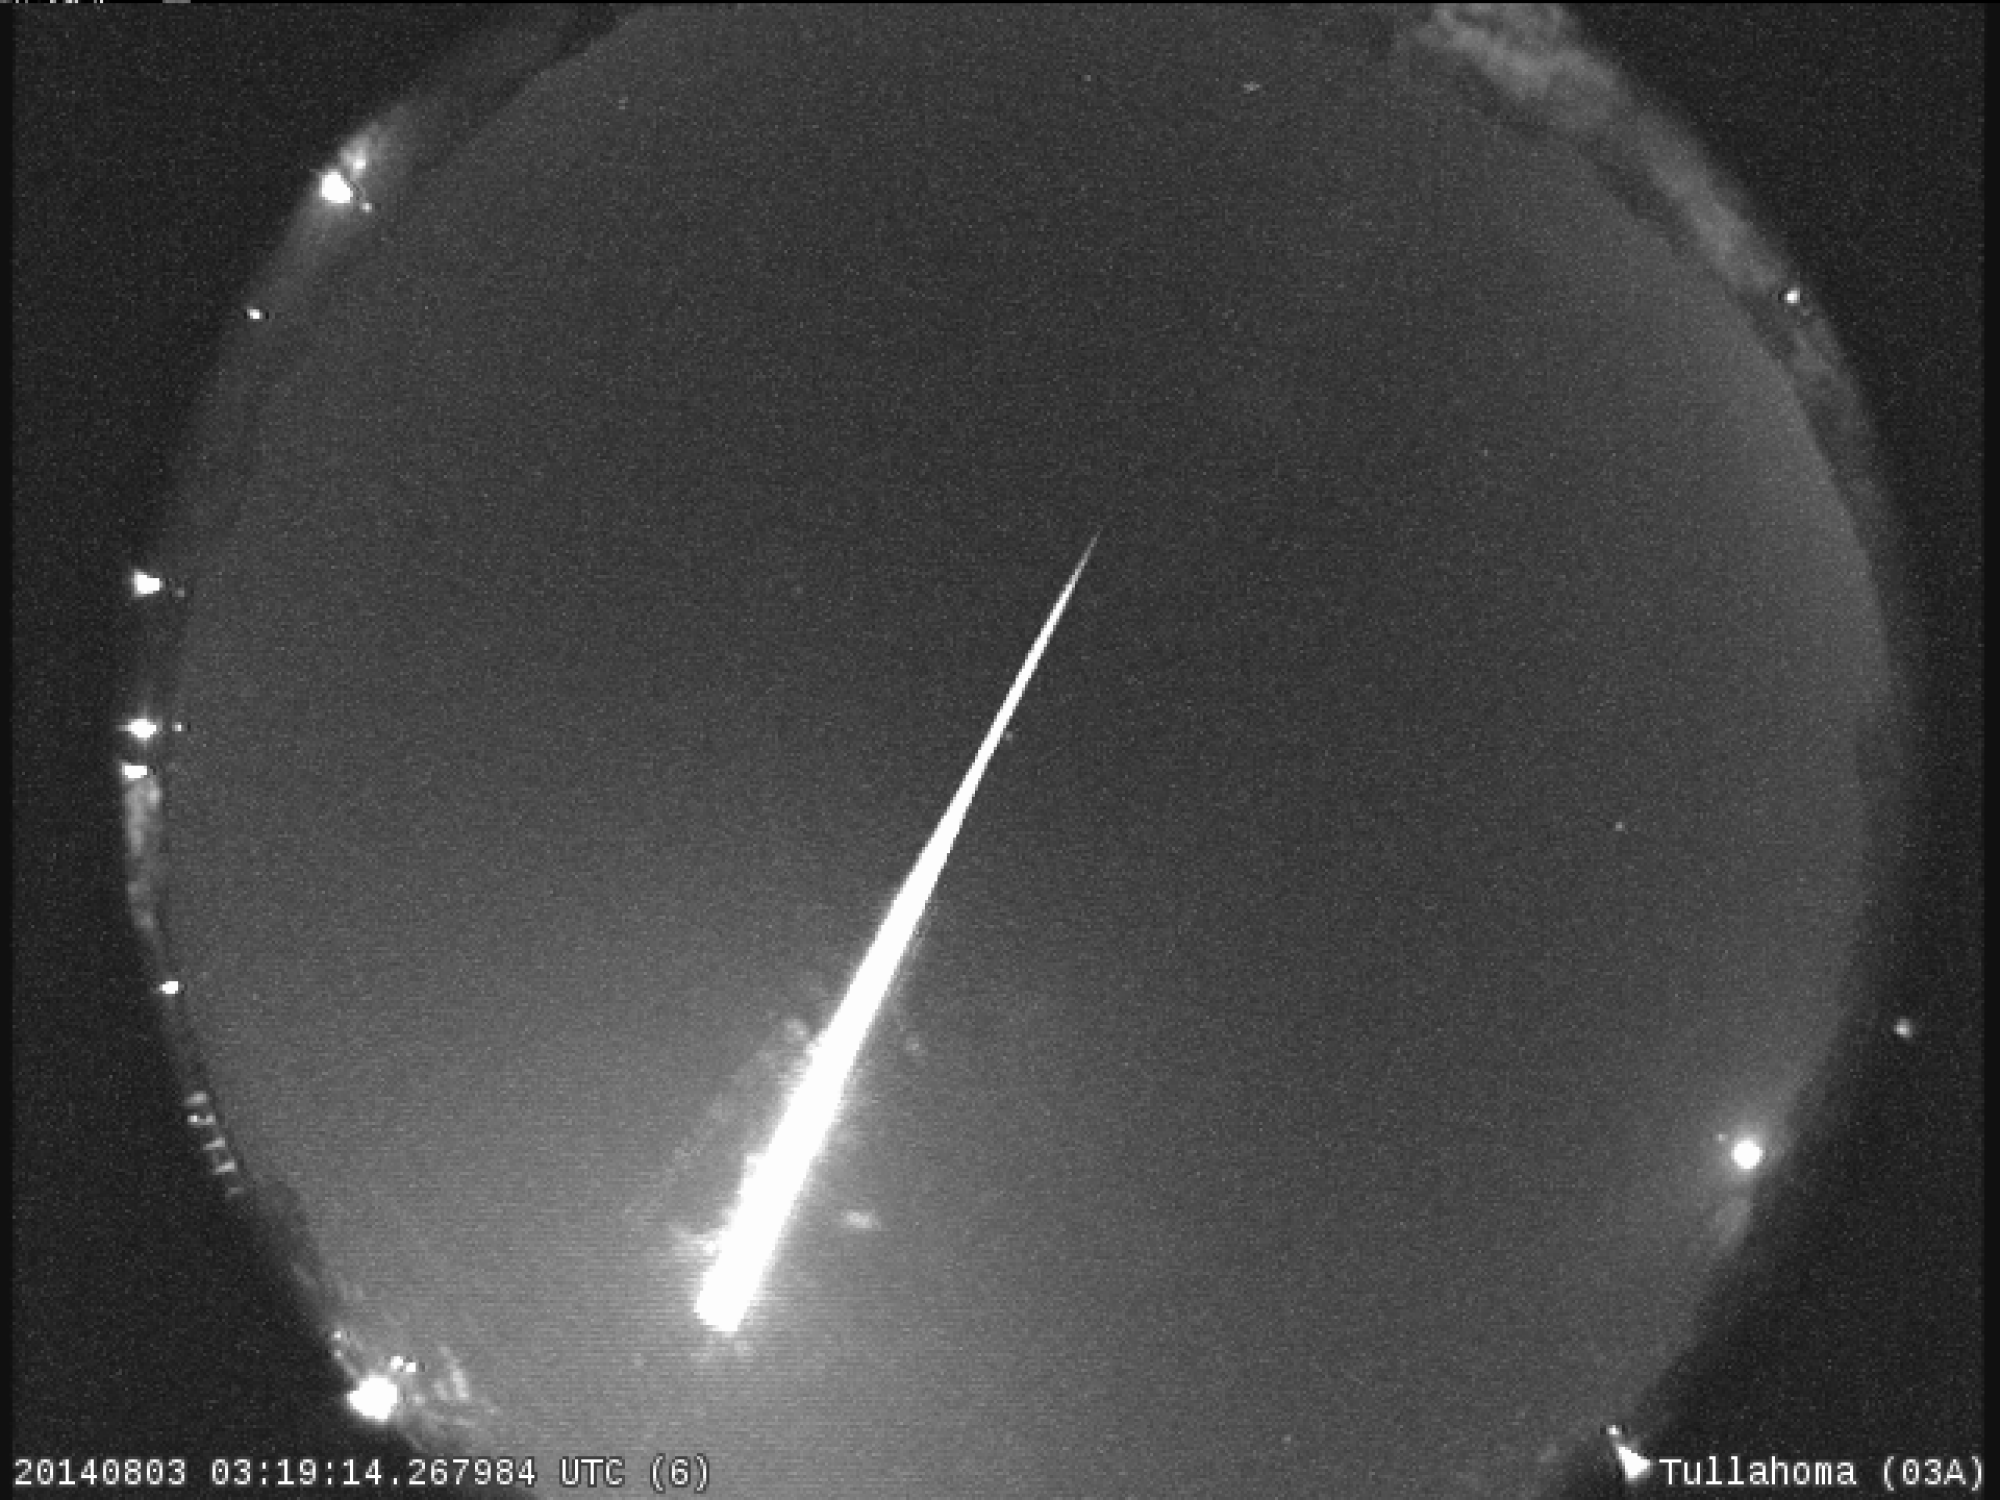 In August 2014, a NASA camera spotted a bright fireball exploding over Tennessee. 